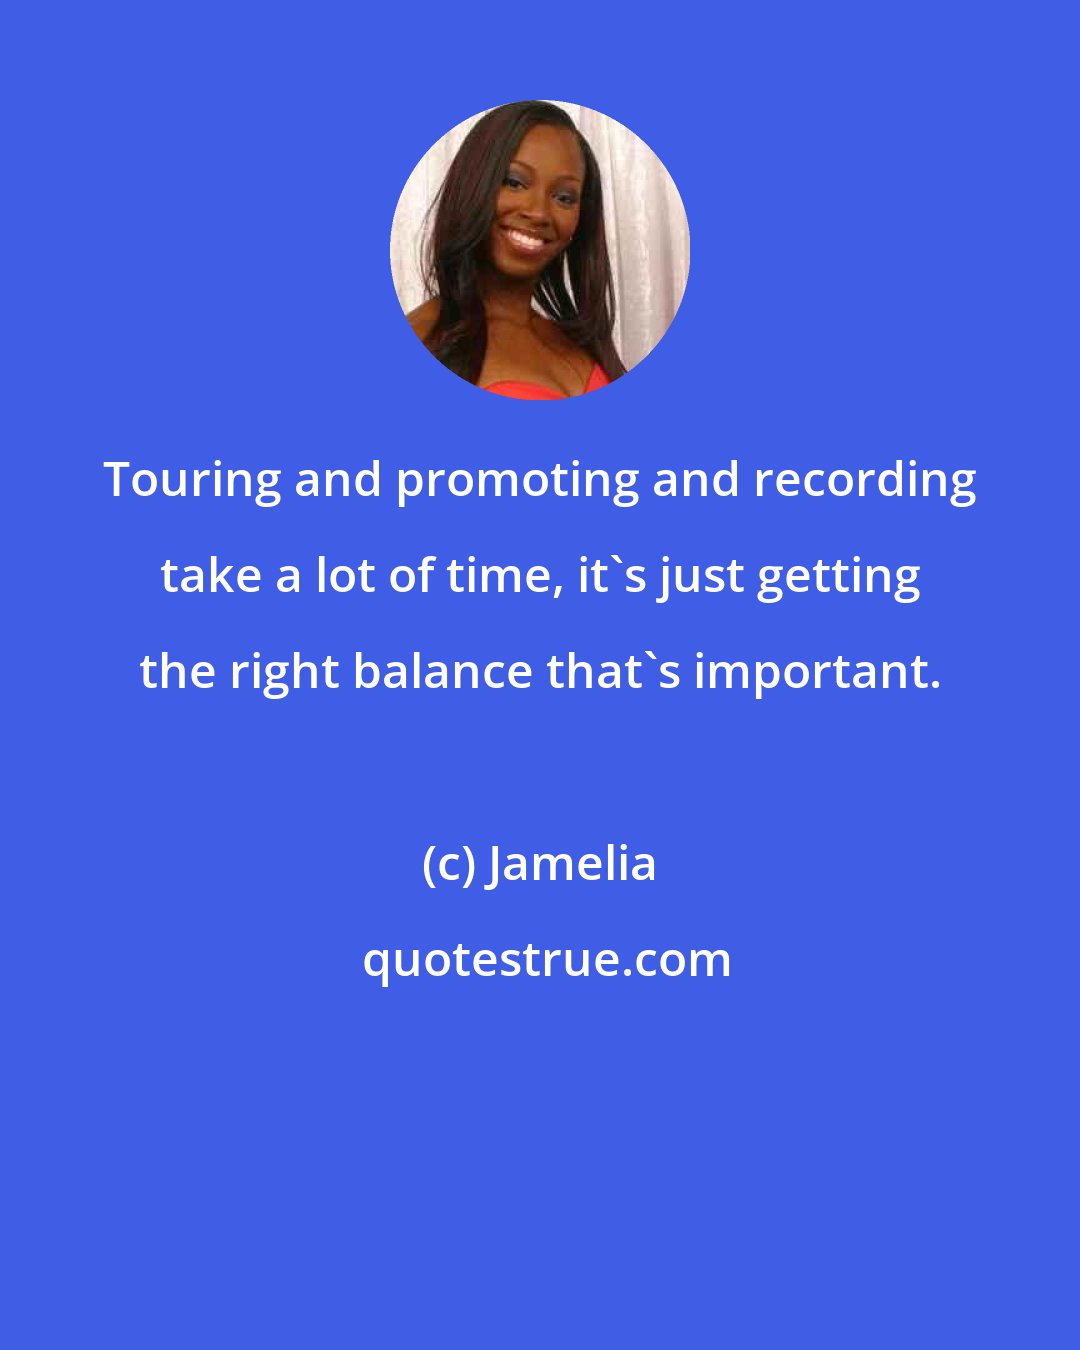 Jamelia: Touring and promoting and recording take a lot of time, it's just getting the right balance that's important.